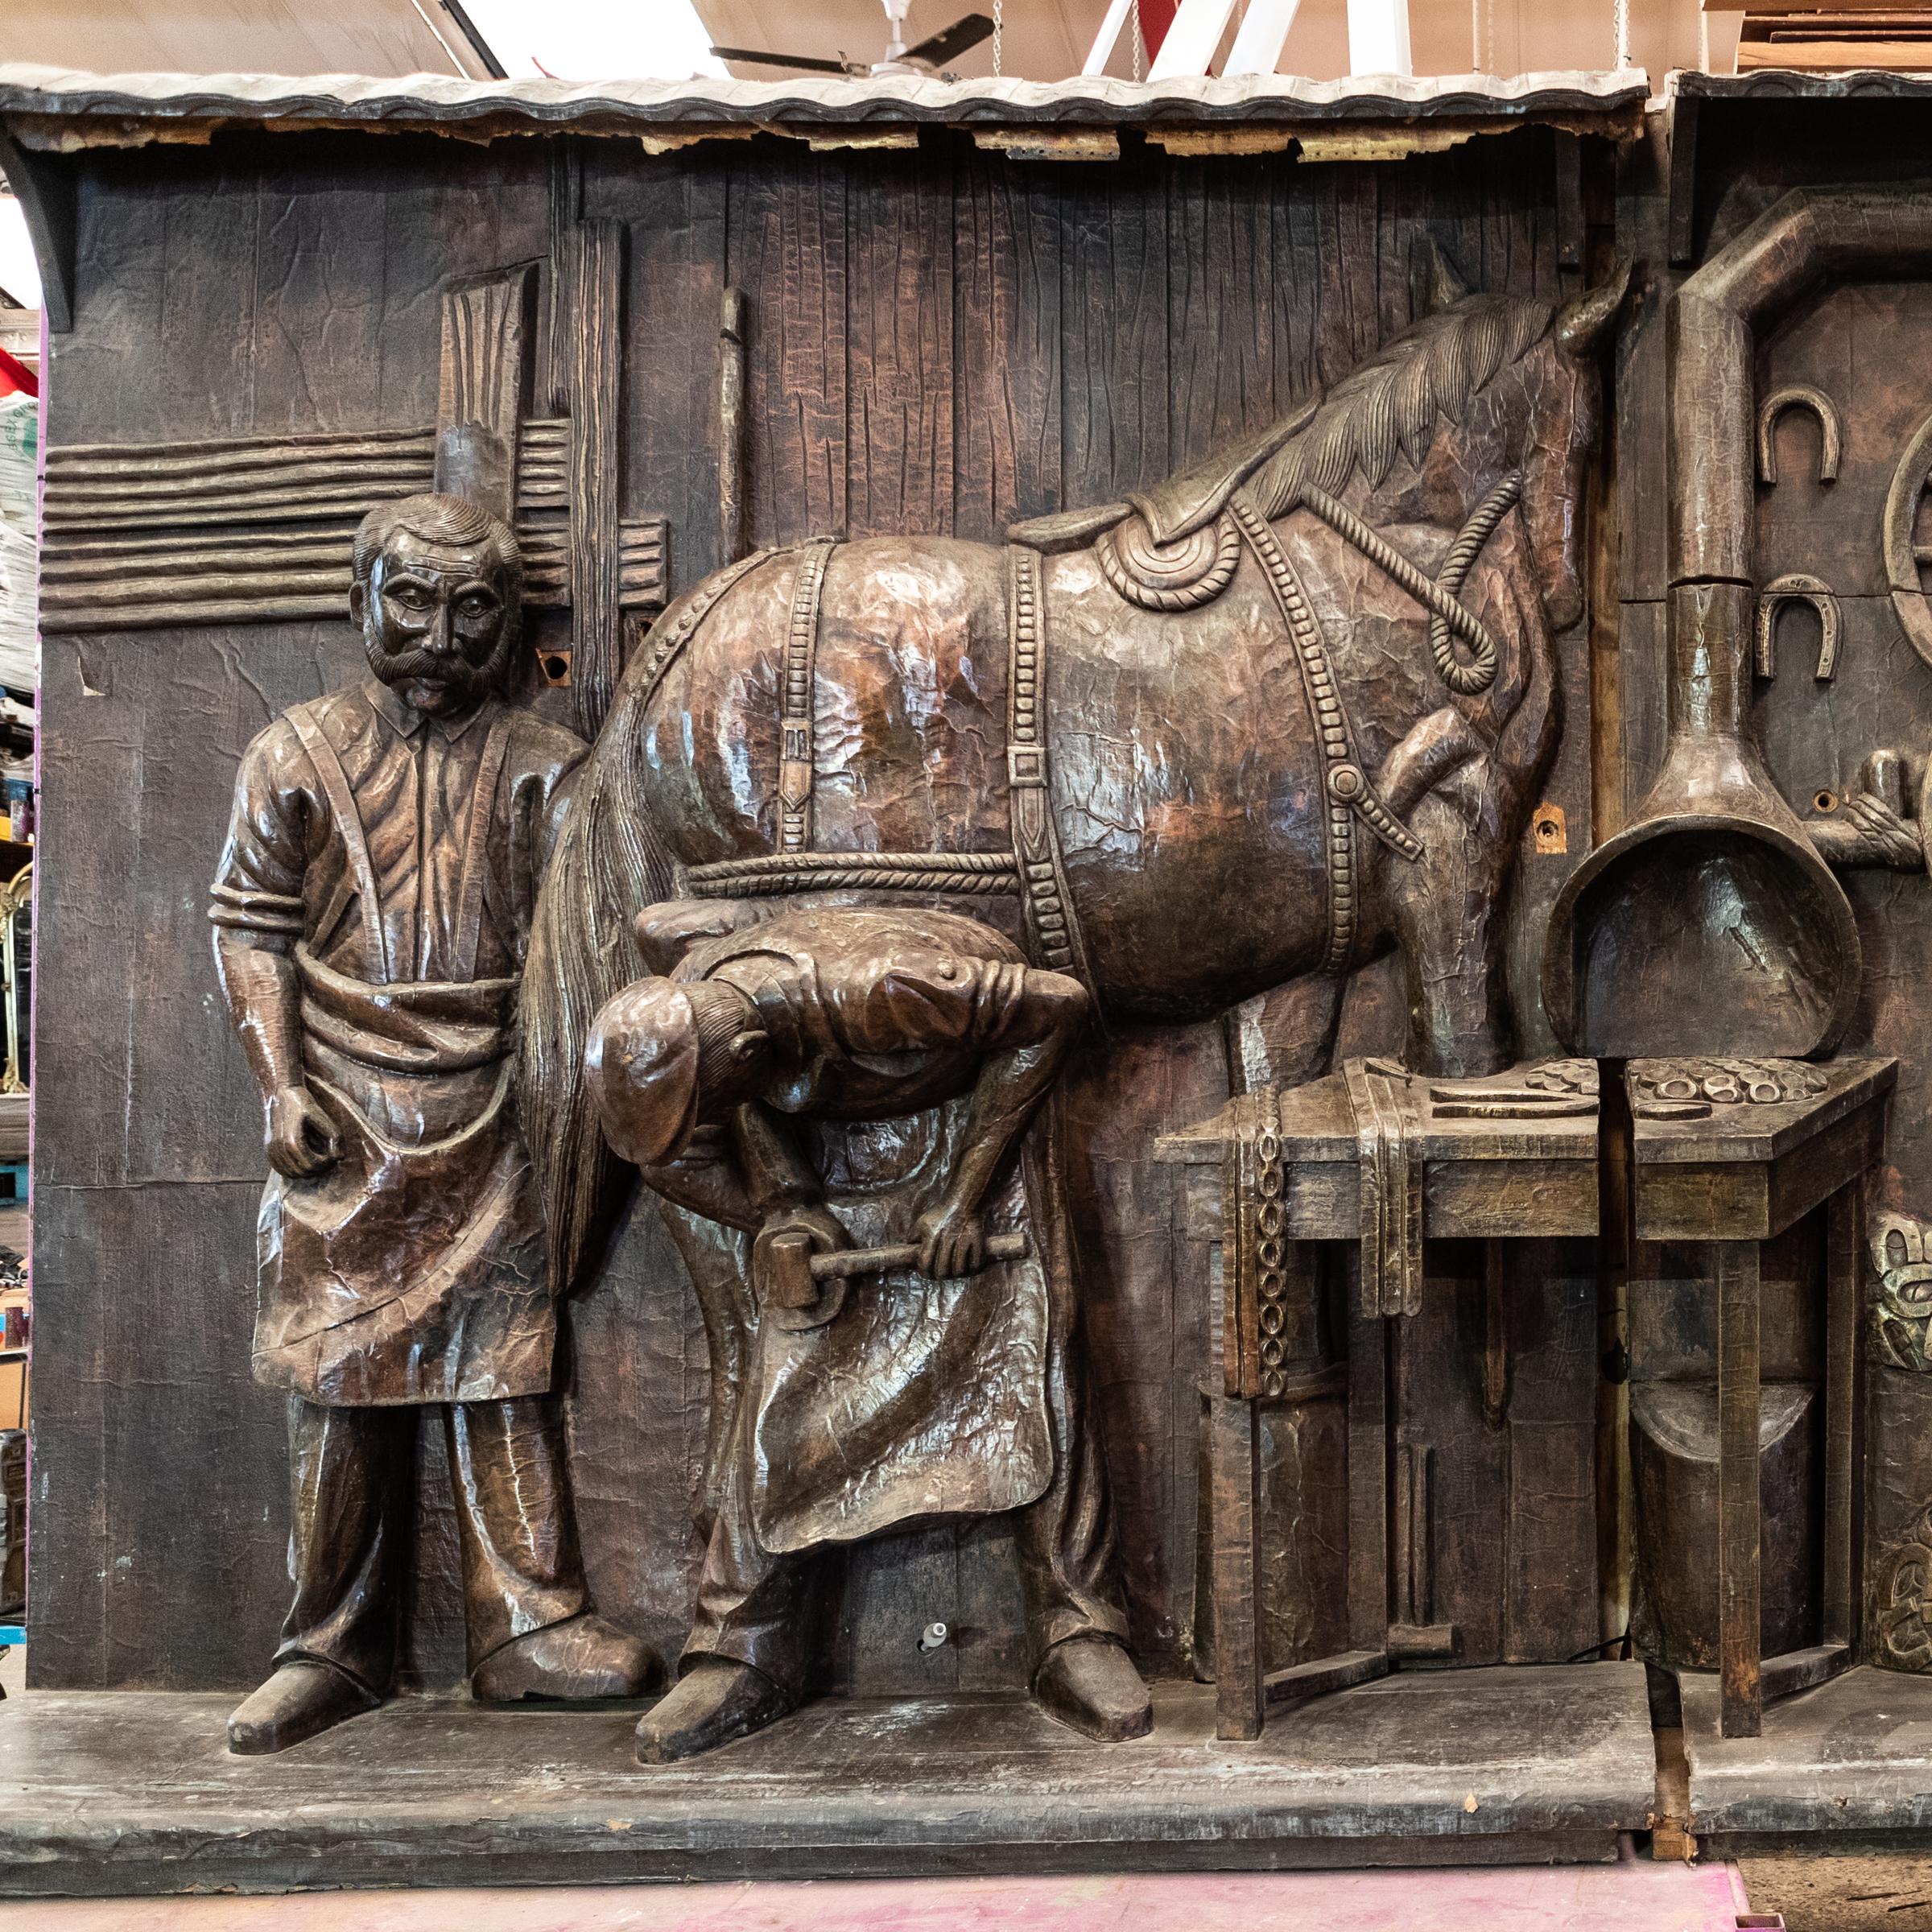 A truly unique piece of London history we have this blacksmiths and grooms working with horses scene reclaimed from the world-famous, Camden Loch Market.

The sculptures and reliefs that once famously decorated the Old Stable Market, were